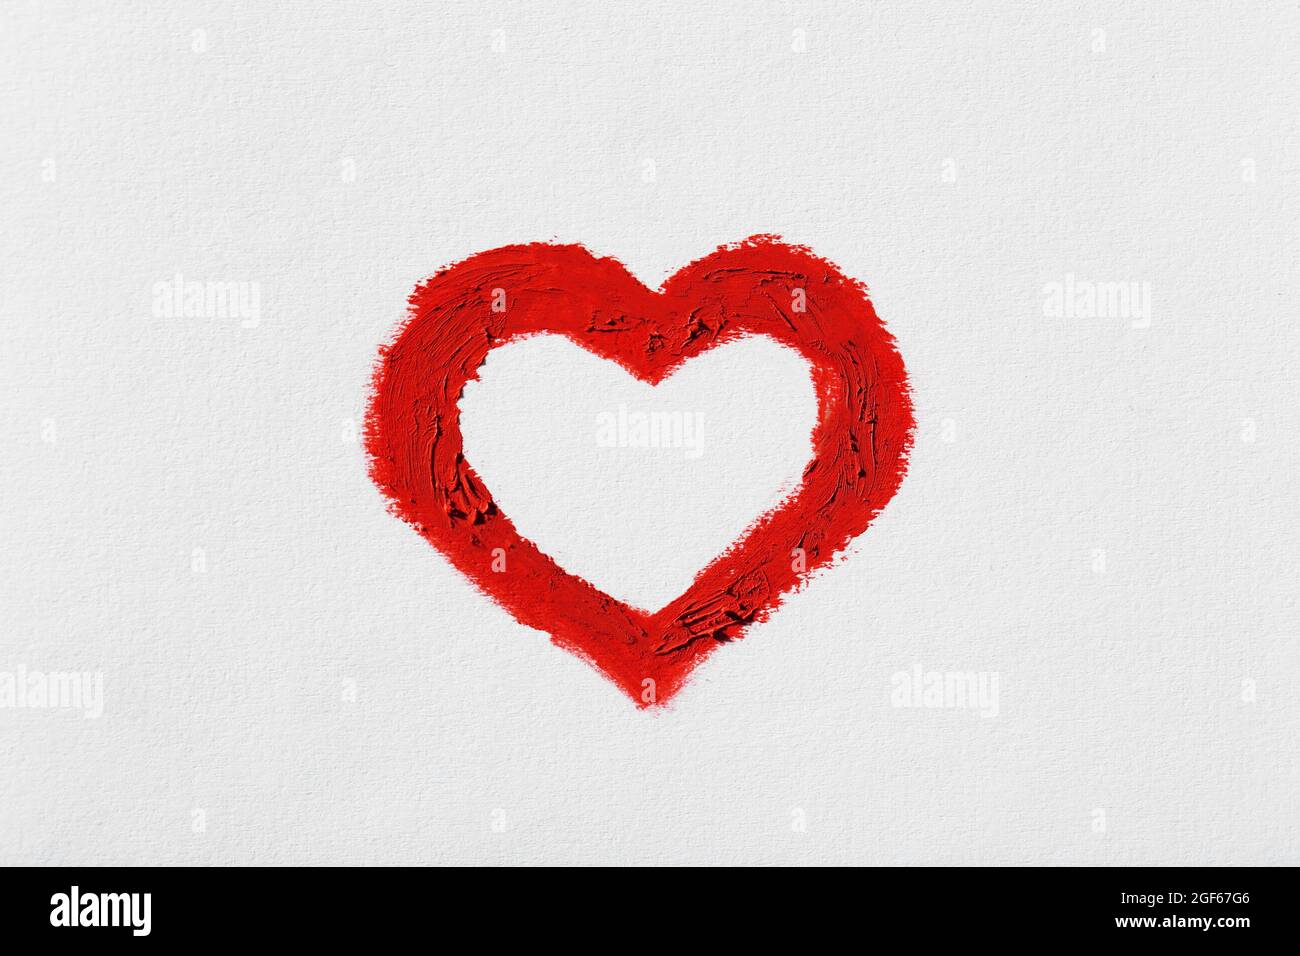 Red heart painted on light background Stock Photo - Alamy